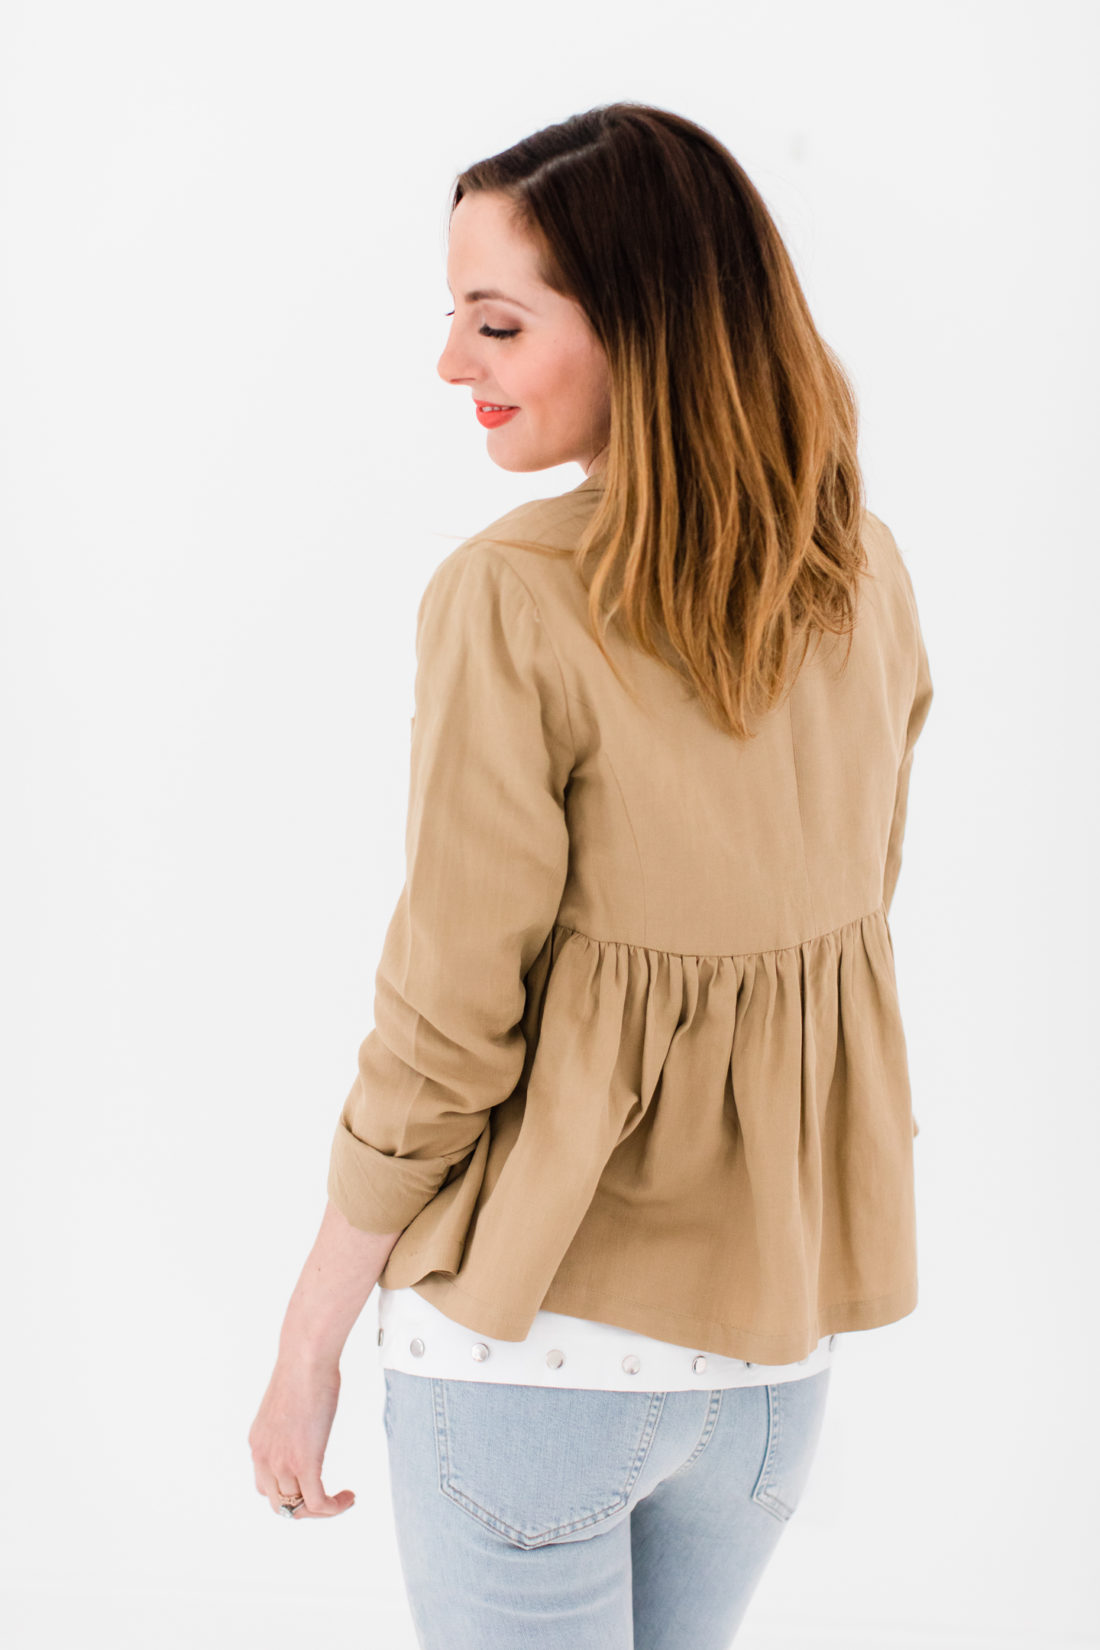 Eva Amurri Martino wears a white bow top, camel ruffle jacket, and jeans as part of a post about packing simply